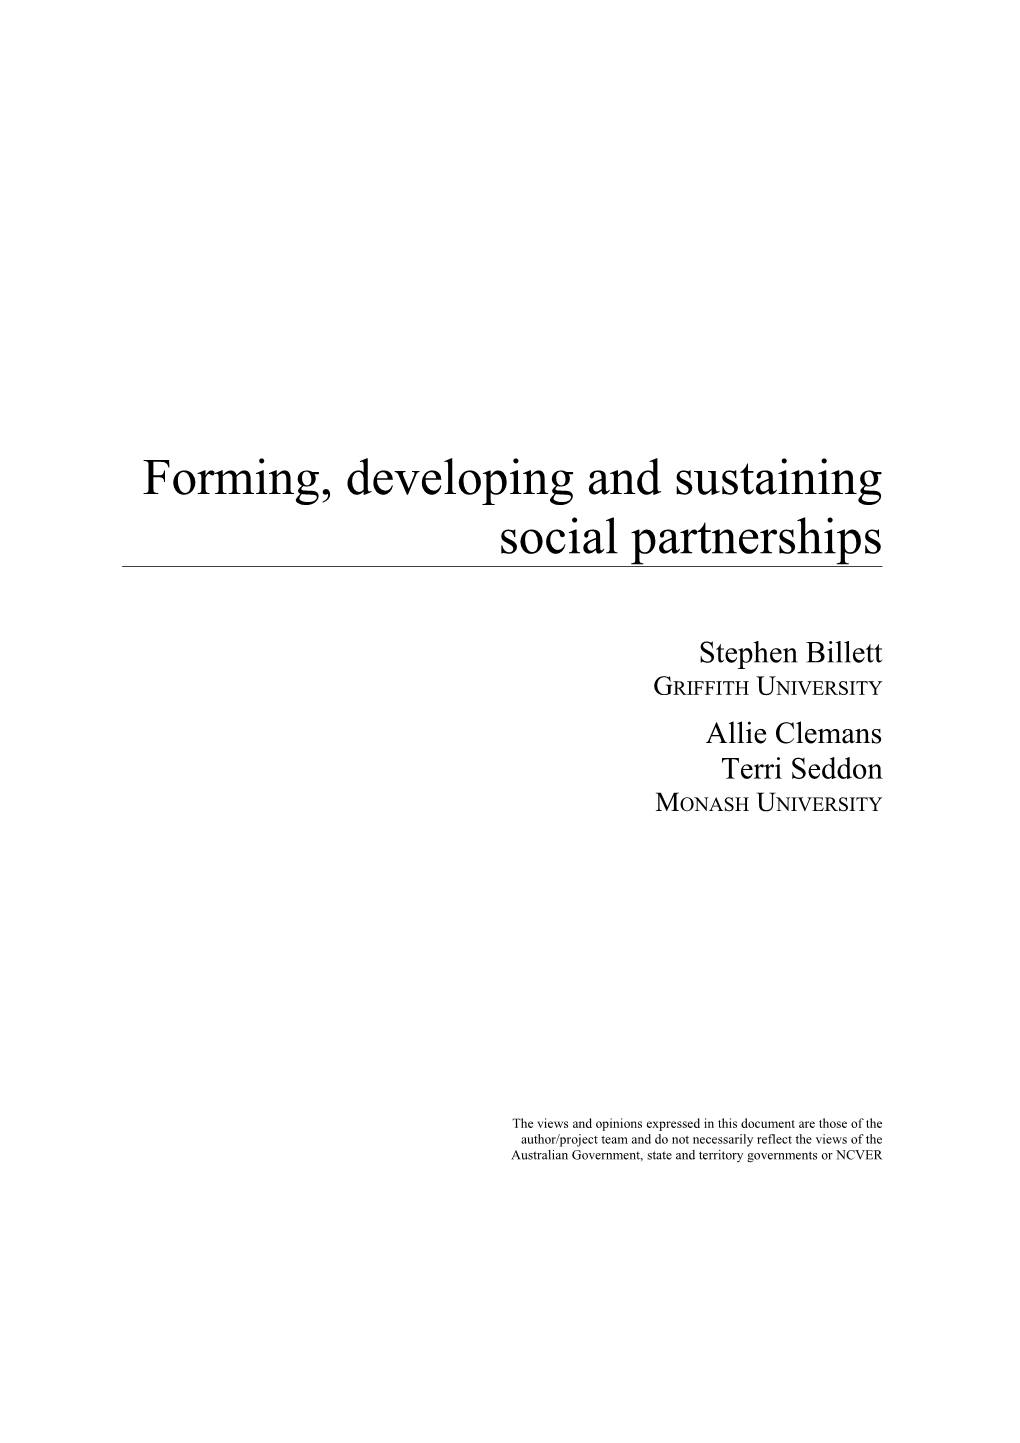 Forming, Developing and Sustaining Social Partnerships